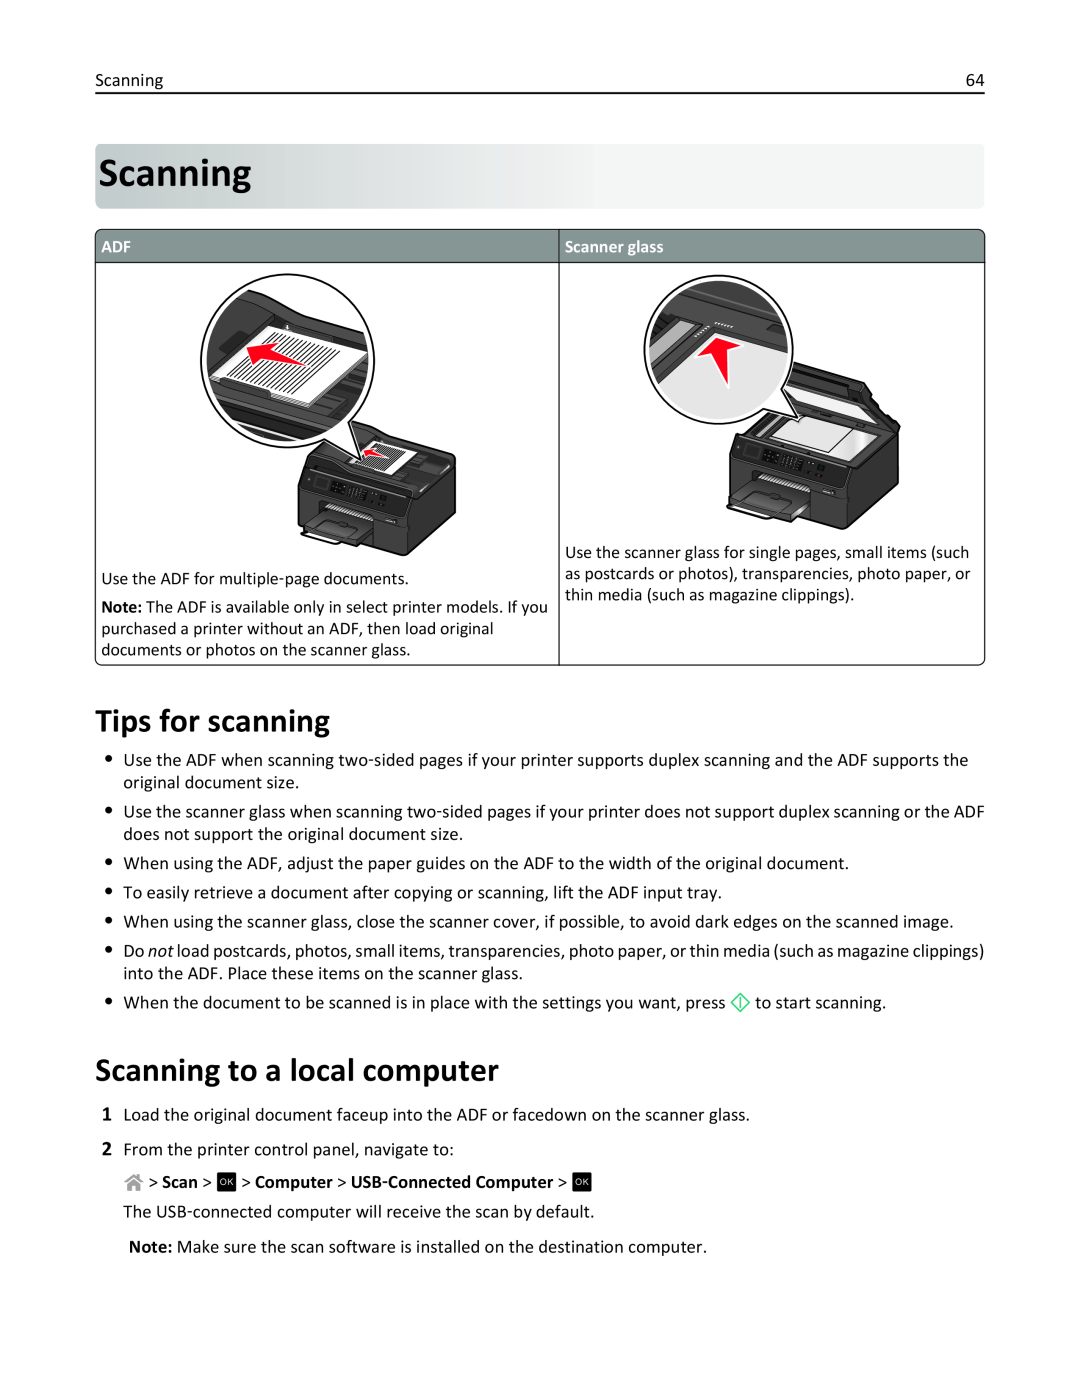 Lexmark PRO4000C manual Tips for scanning, Scanning to a local computer, Scan OK Computer USB‑Connected Computer OK 